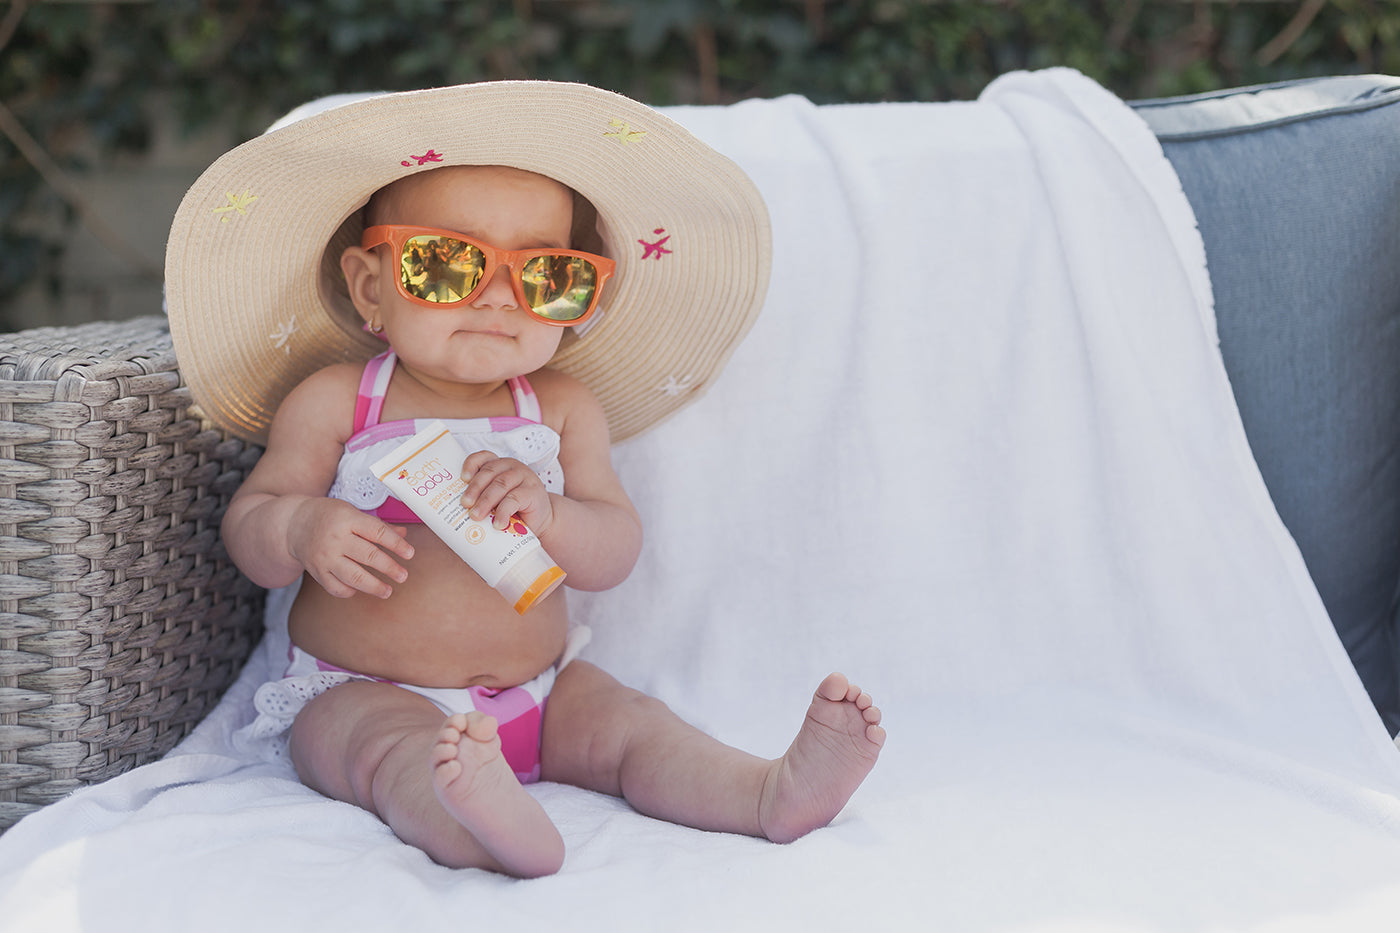 Baby girl in hat and sunglasses holding Earth Baby Broad Spectrum Sunscreen